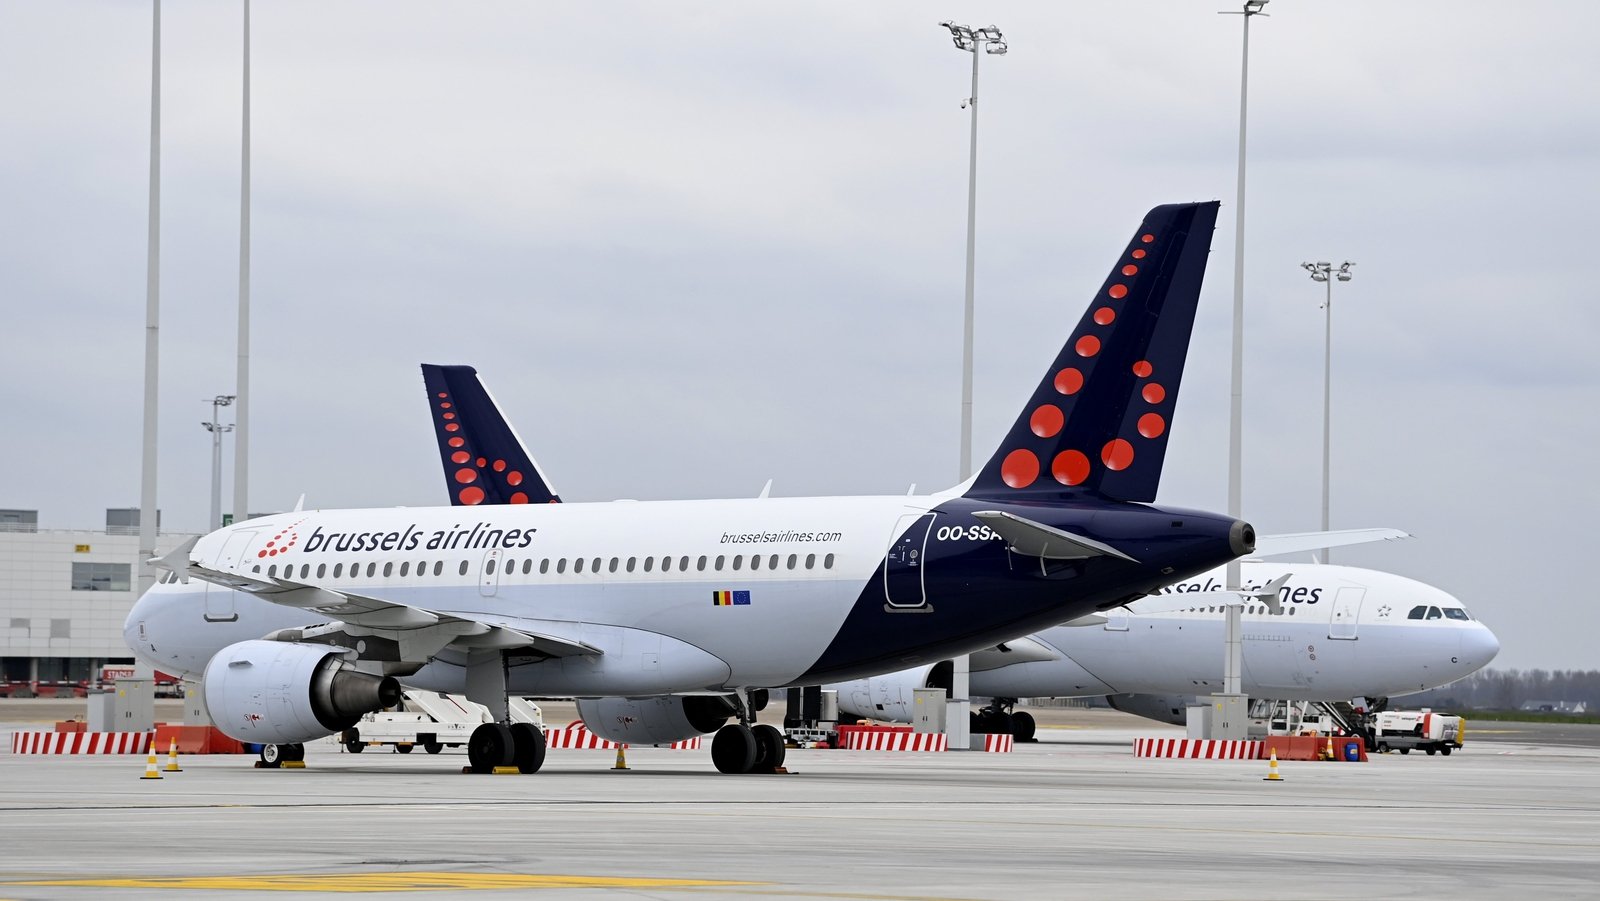 Air France, Brussels Airlines in EU greenwashing probe